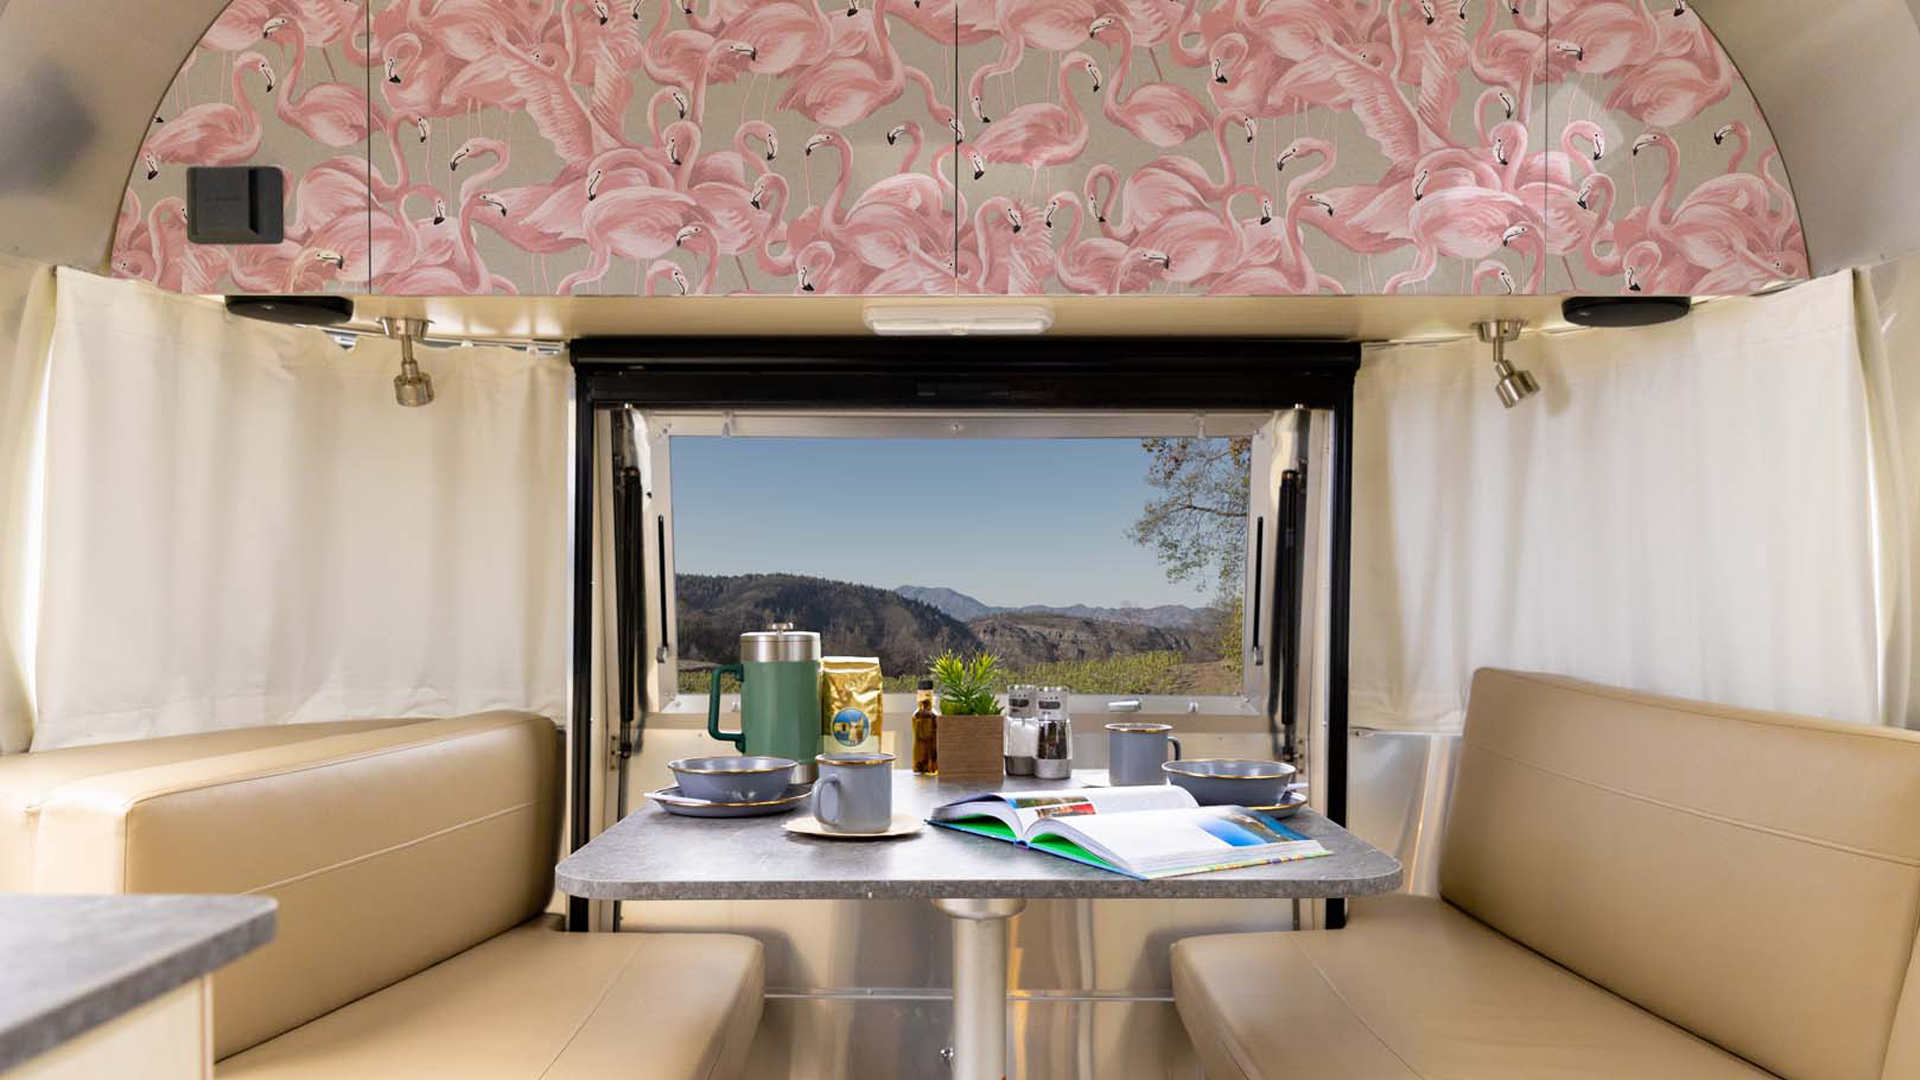 Flamingo printed tempaper installed in the galley of an Airstream travel trailer